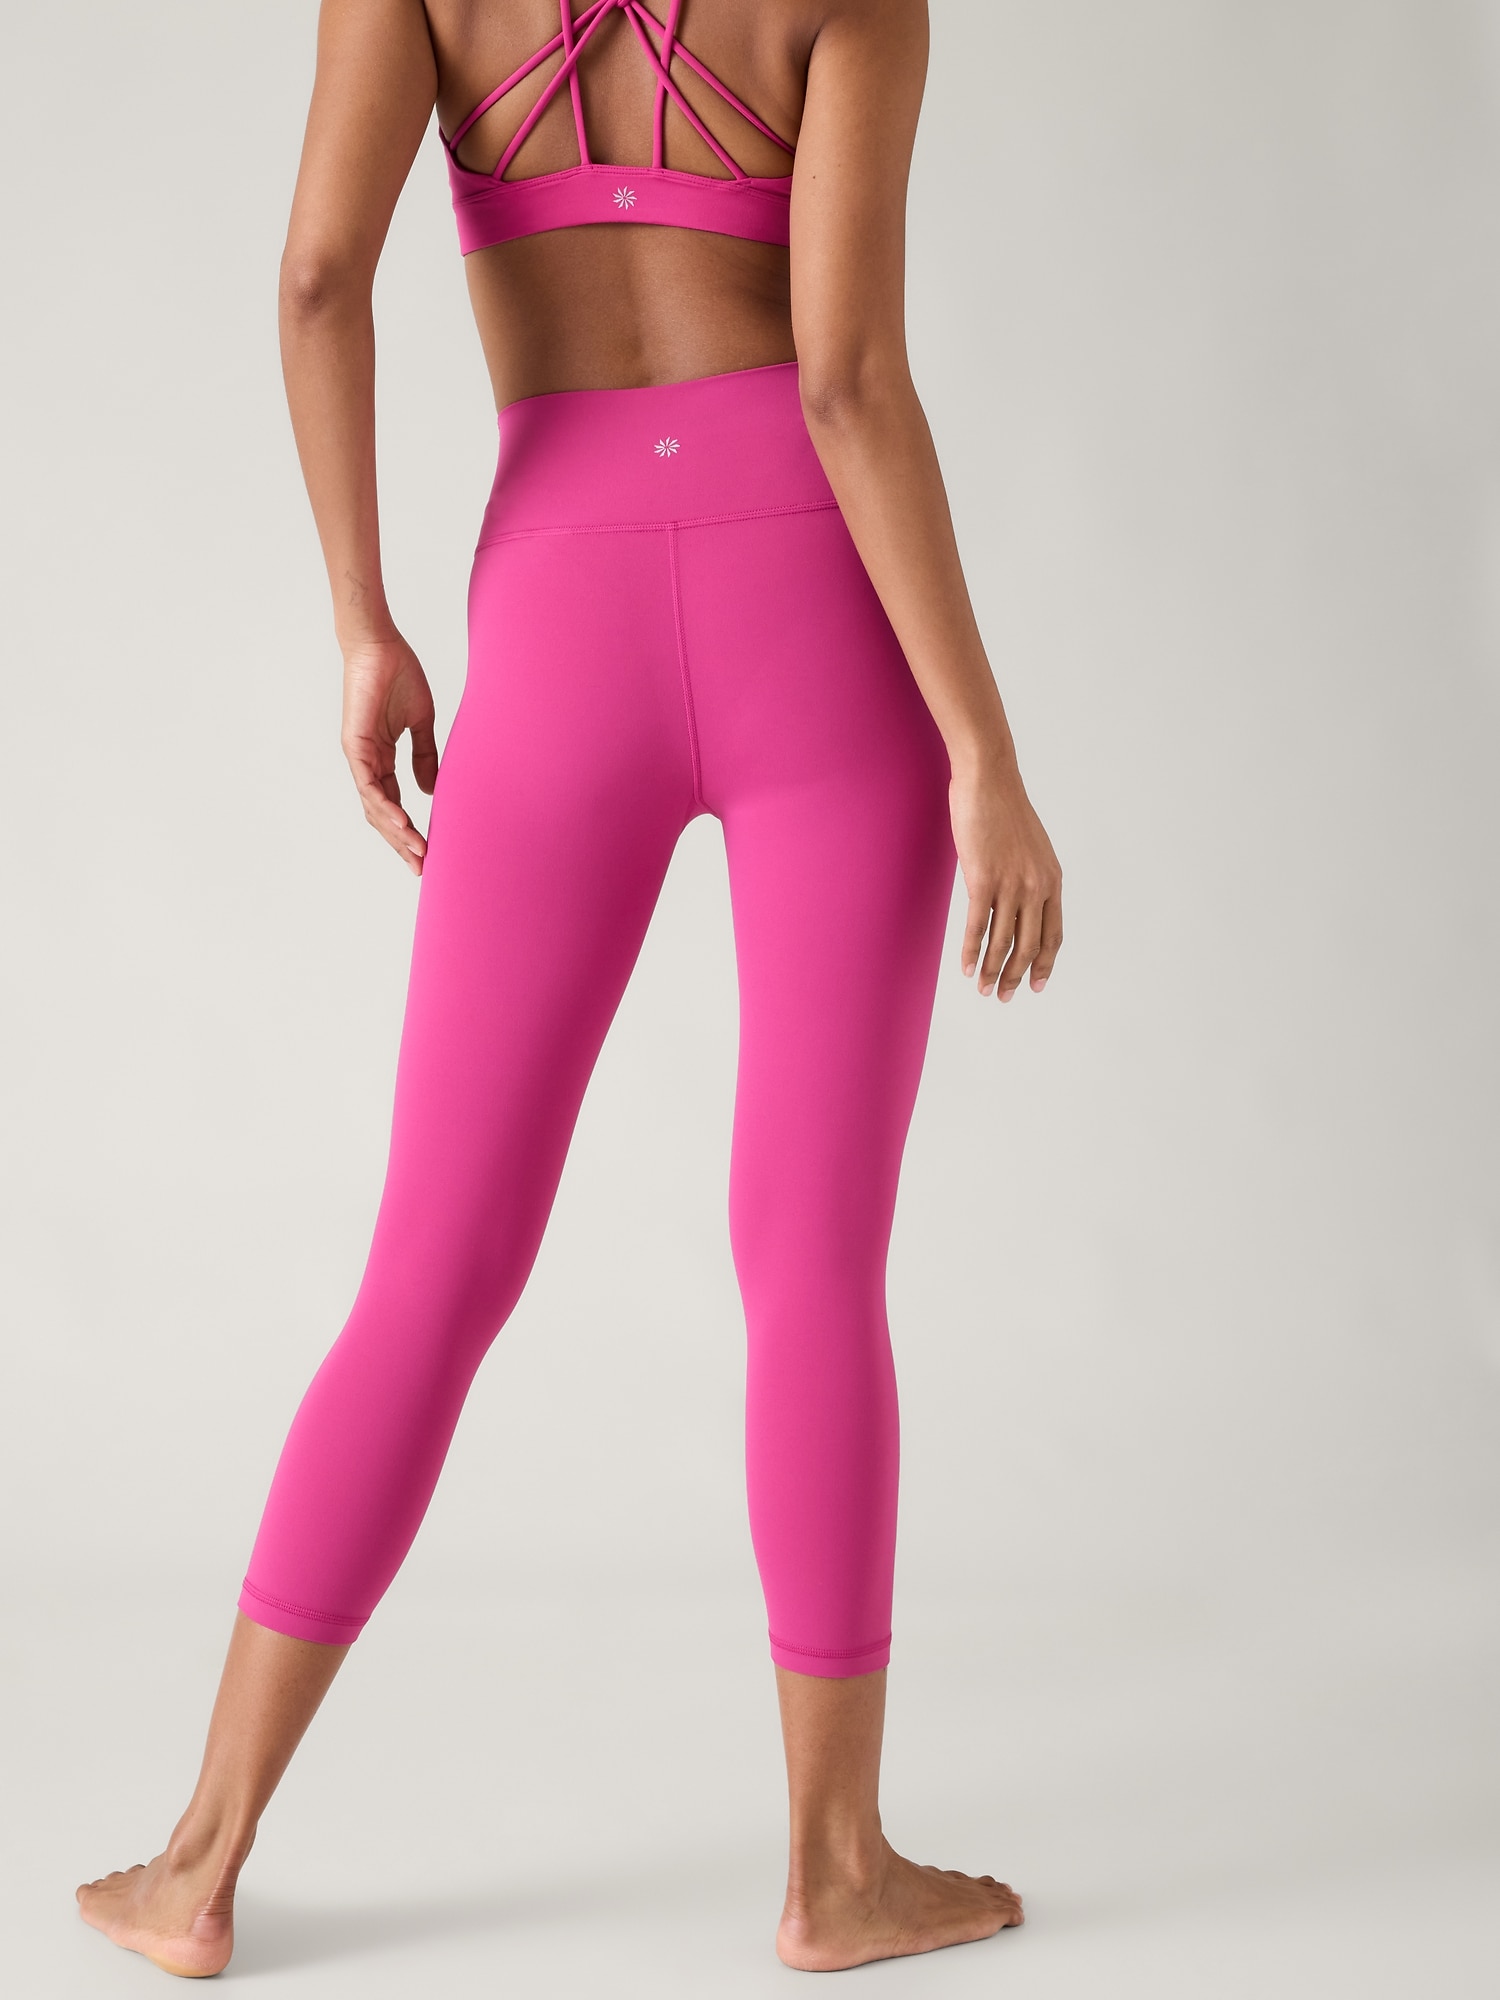 ATHLETIC WORKS LEGGING/ PANT/CAPRIS/JOGGER - AAA Polymer